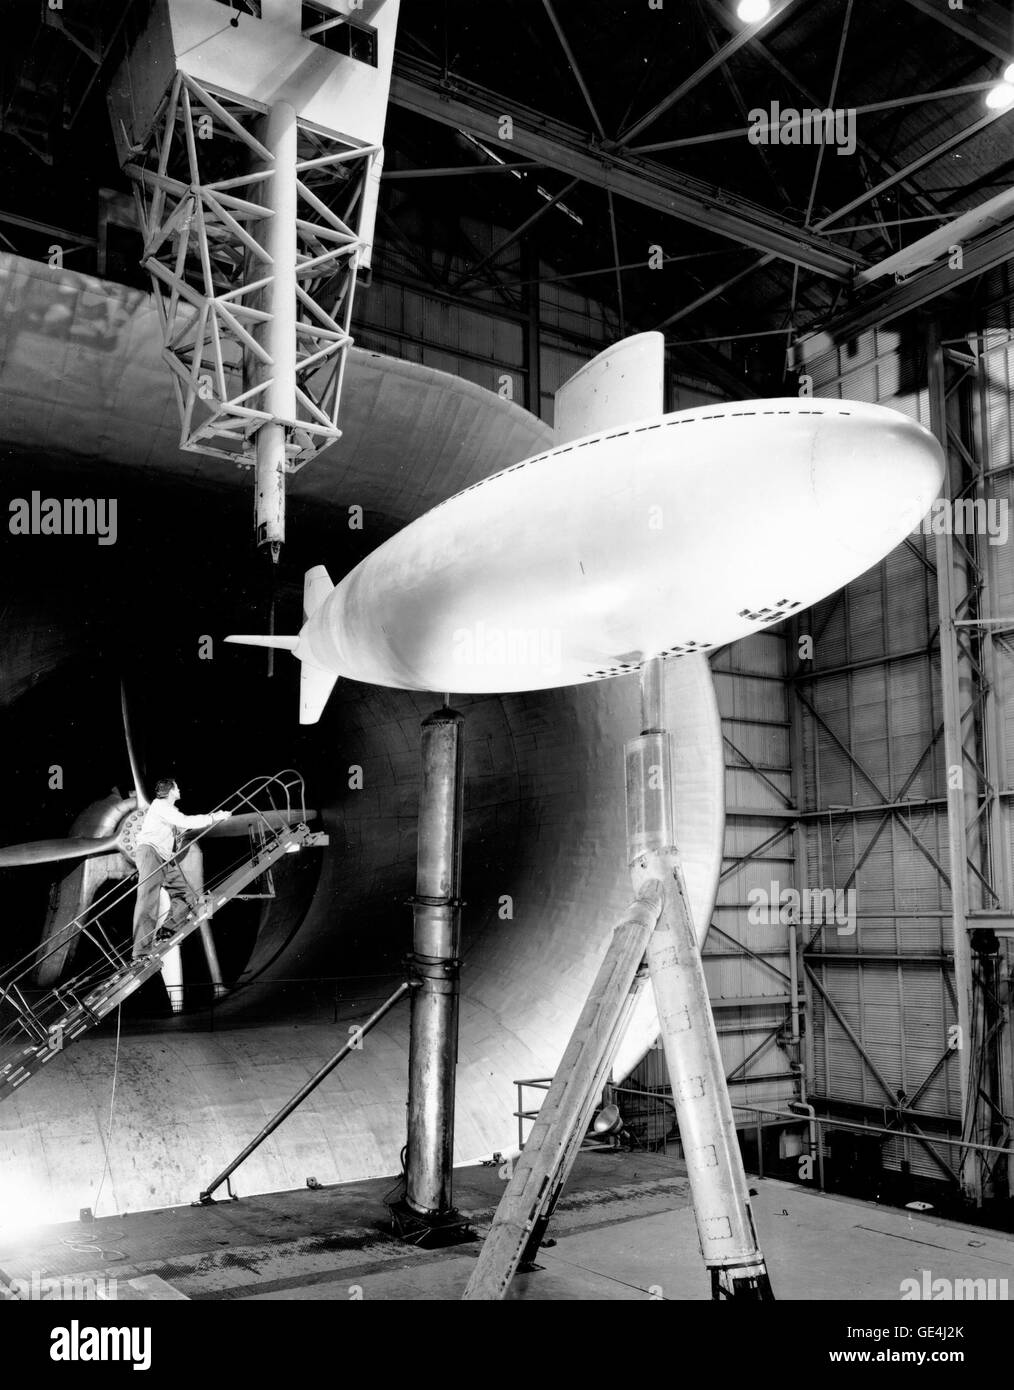 In 1950 Langley tested the drag characteristics of what was then the world's fastest submarine, the Albacore, in the 30 x 60 Full Scale Tunnel. Water and air are both essentially fluids of different densities. Air traveling at high speed can simulate water traveling at lower speed for many purposes. Stock Photo